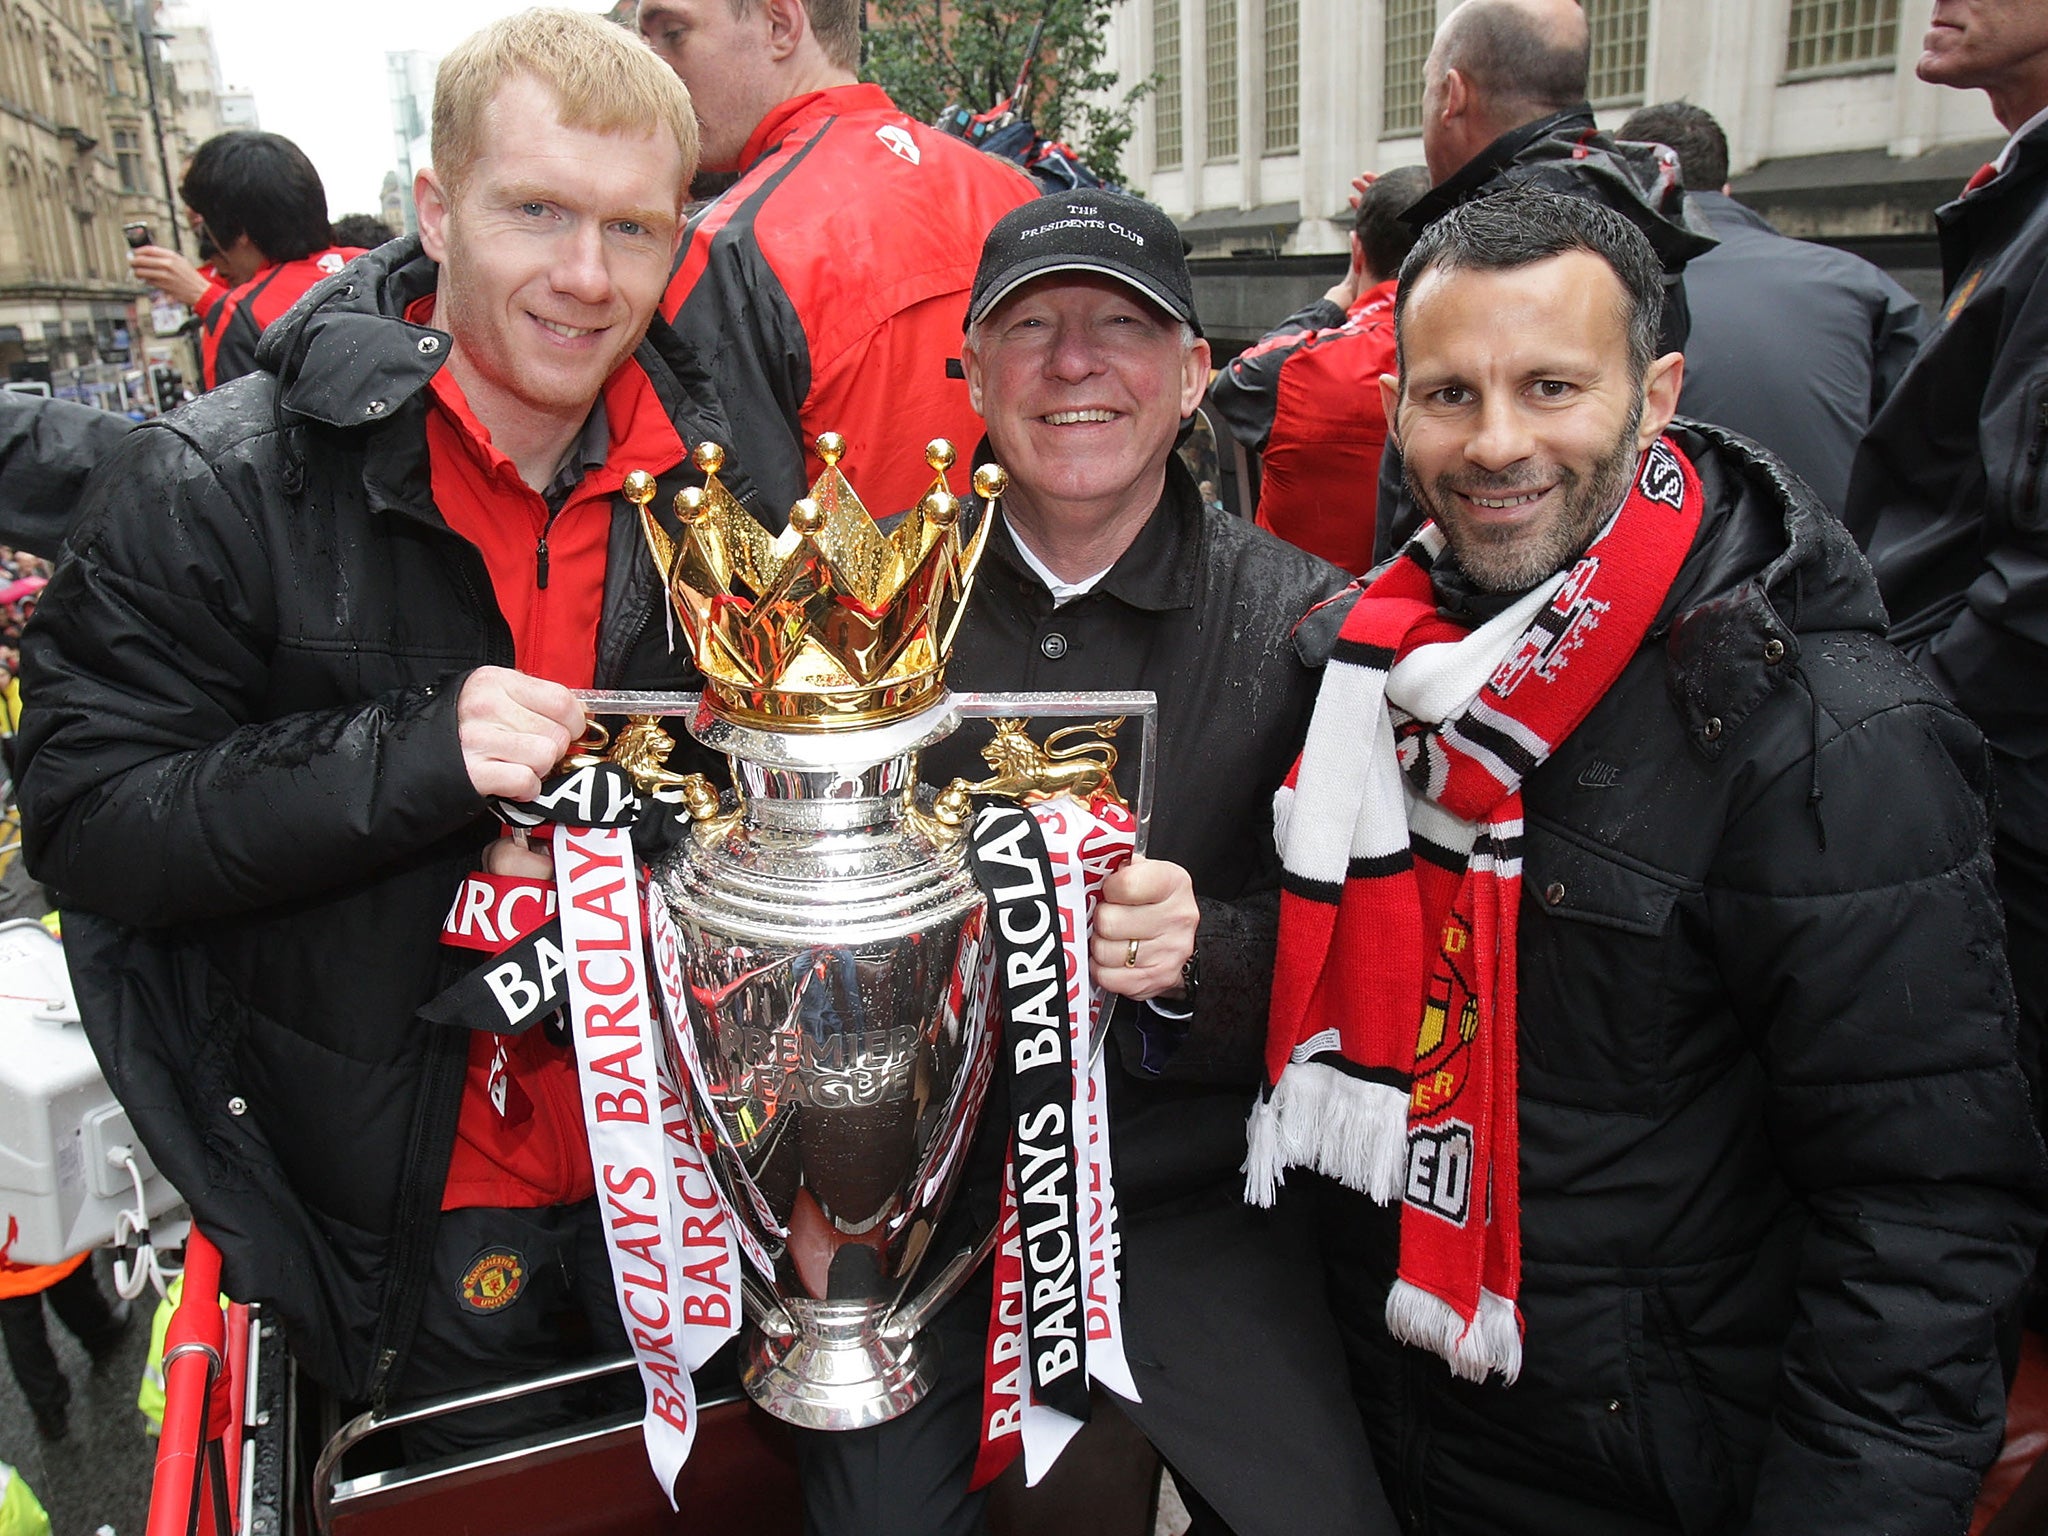 Paul Scholes, Ferguson and Giggs pose with the trophy in 2011